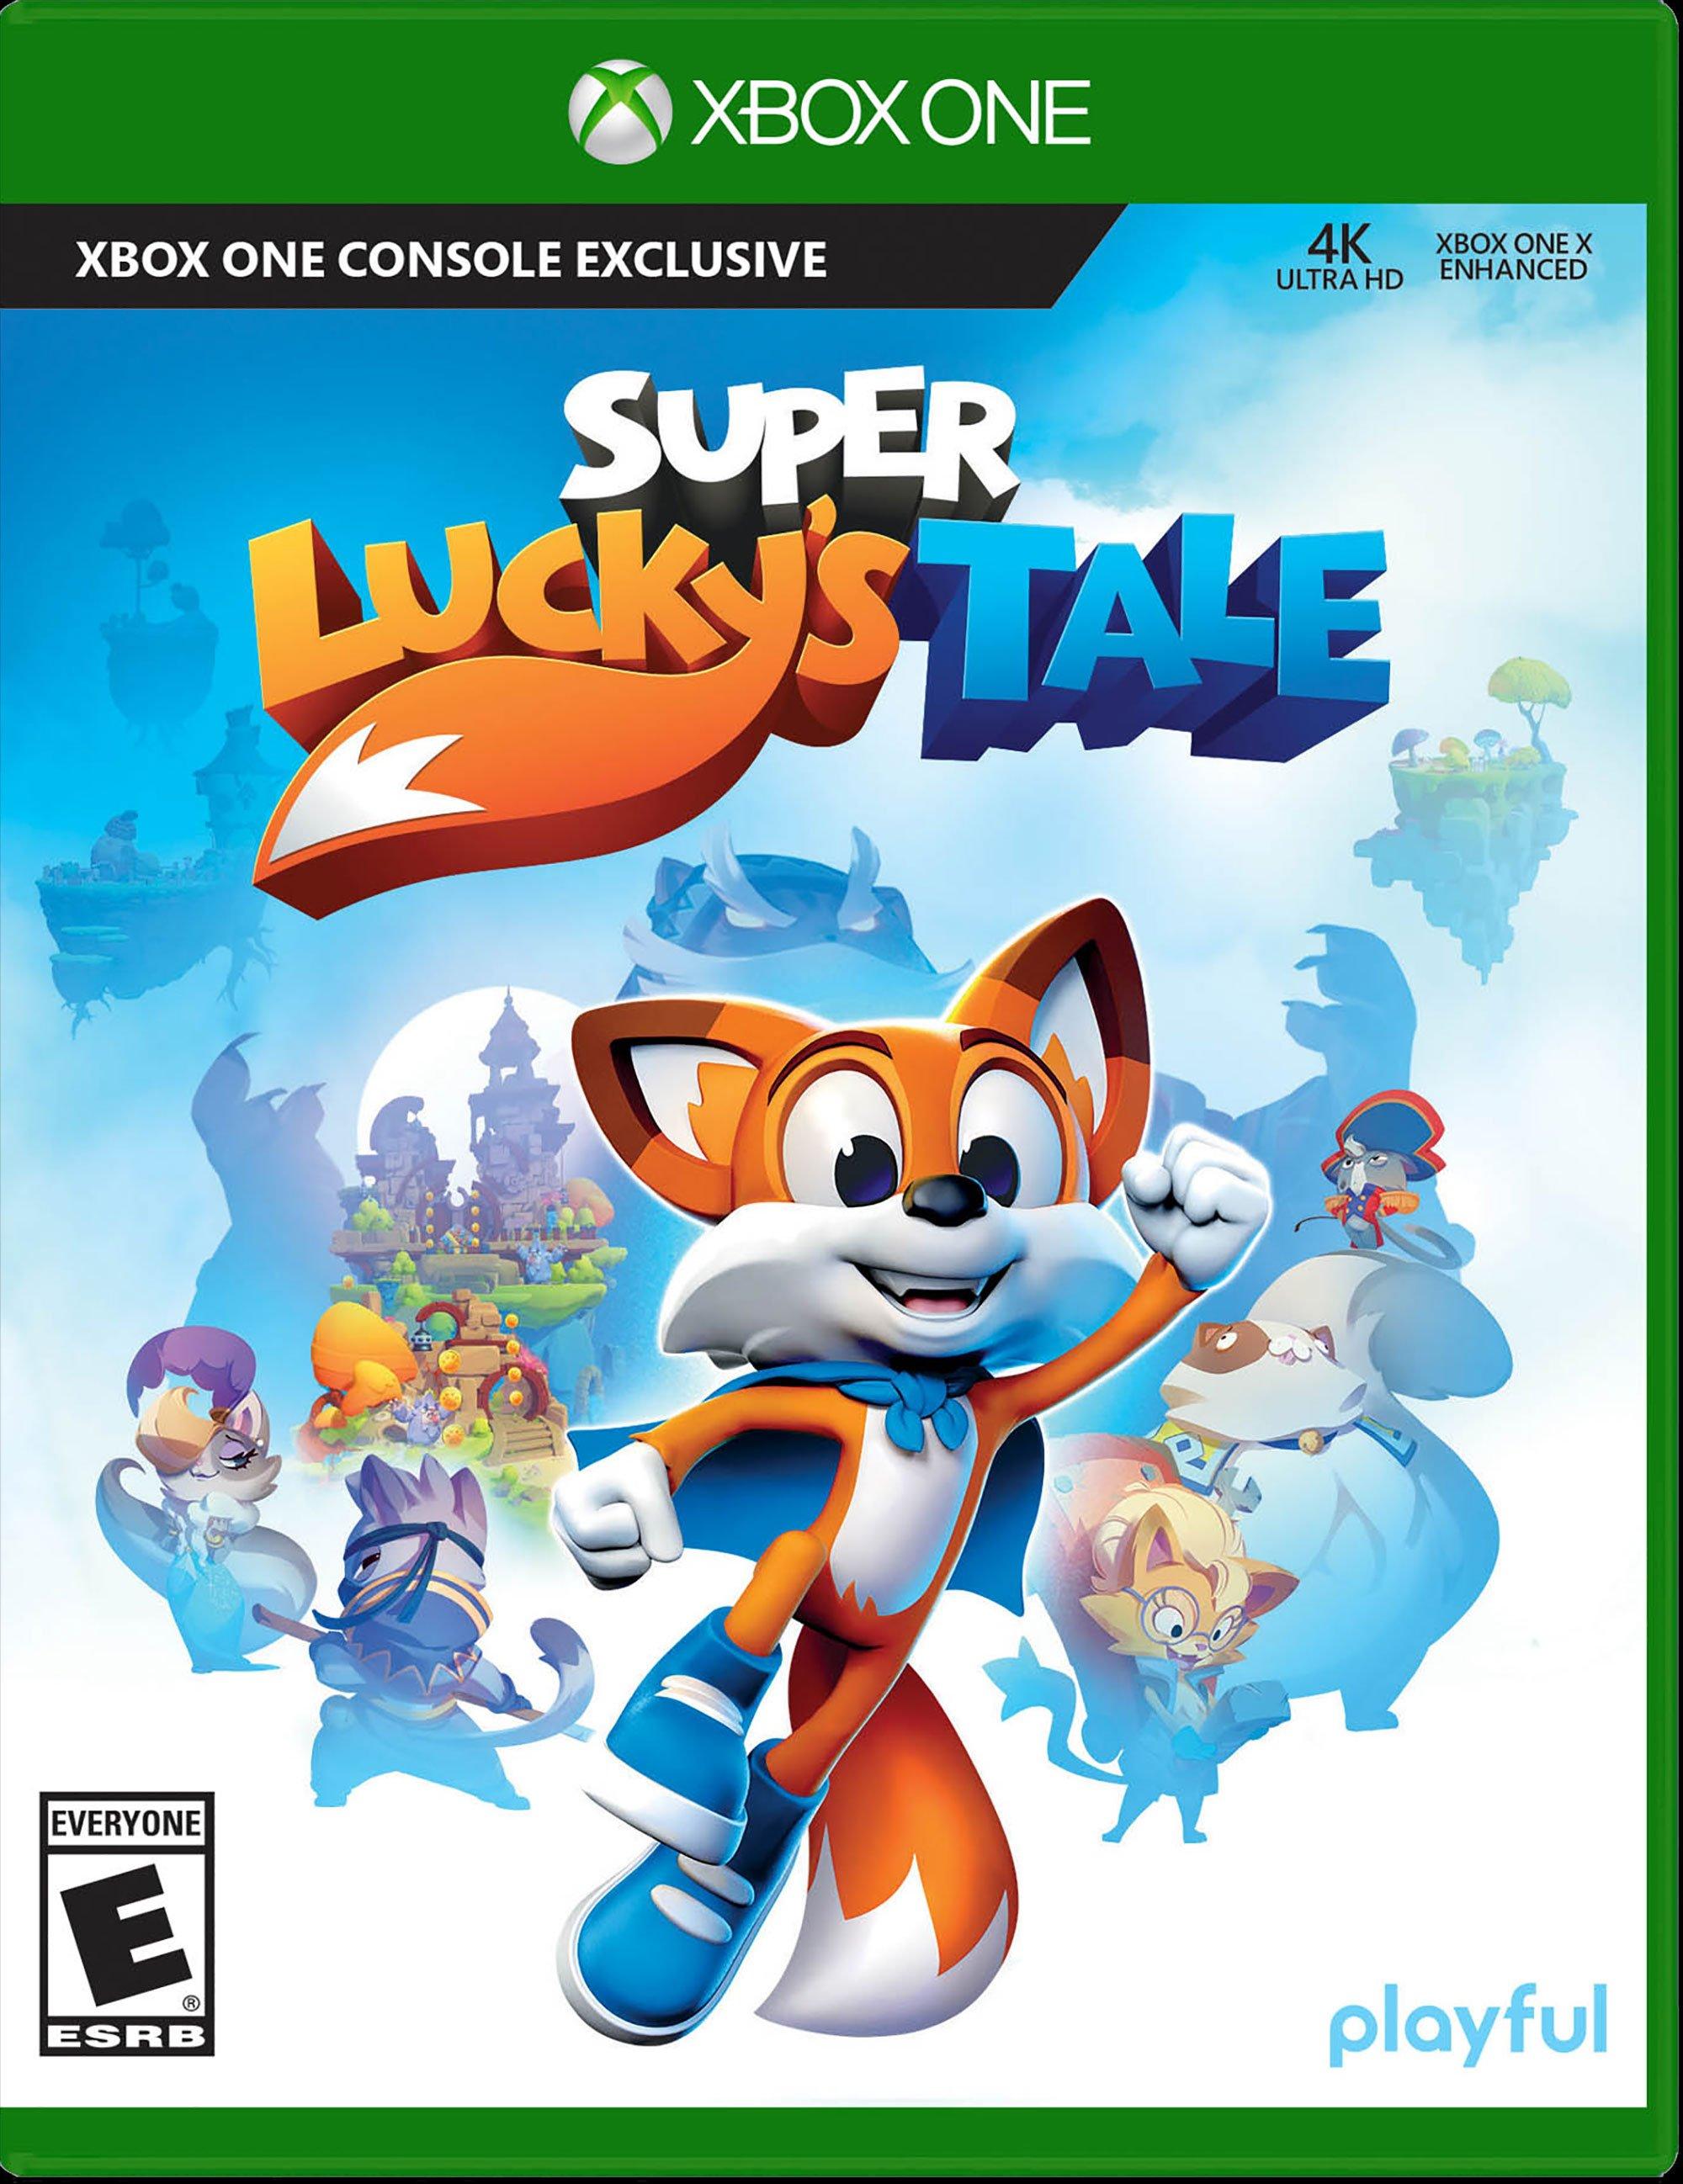 new super lucky's tale price